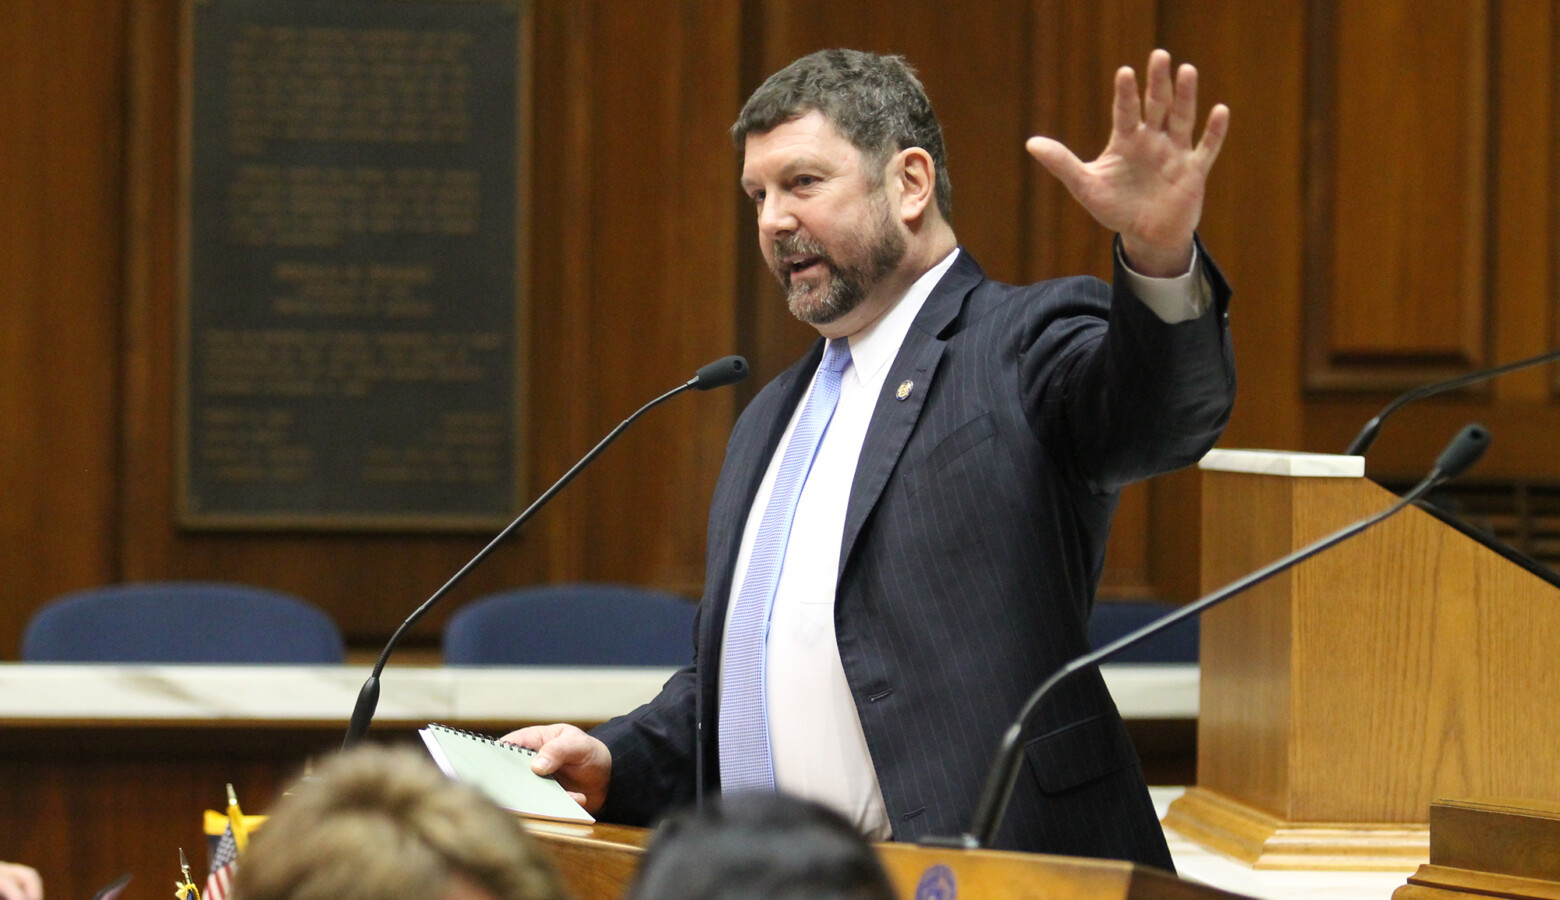 Rep. Jim Lucas (R-Seymour) has repeatedly mocked mask-wearing and decried Gov. Eric Holcomb's use of executive authority throughout the COVID-19 pandemic. (Lauren Chapman/IPB News)